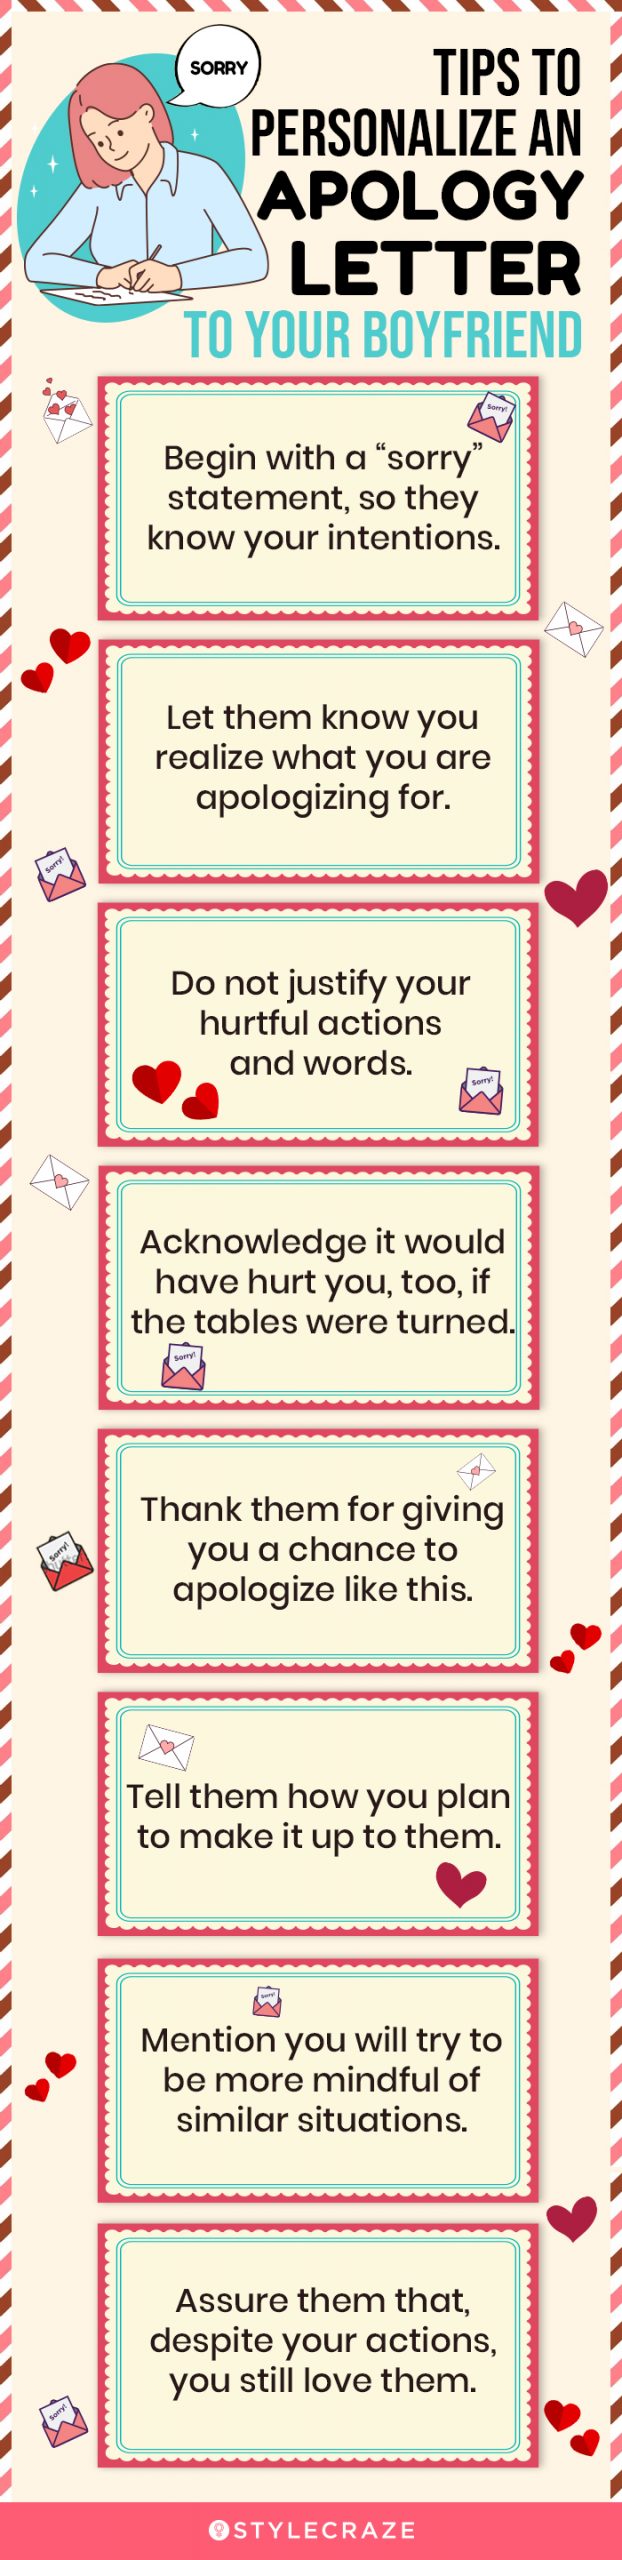 tips to personalize an apology letter to your boyfriend (infographic)